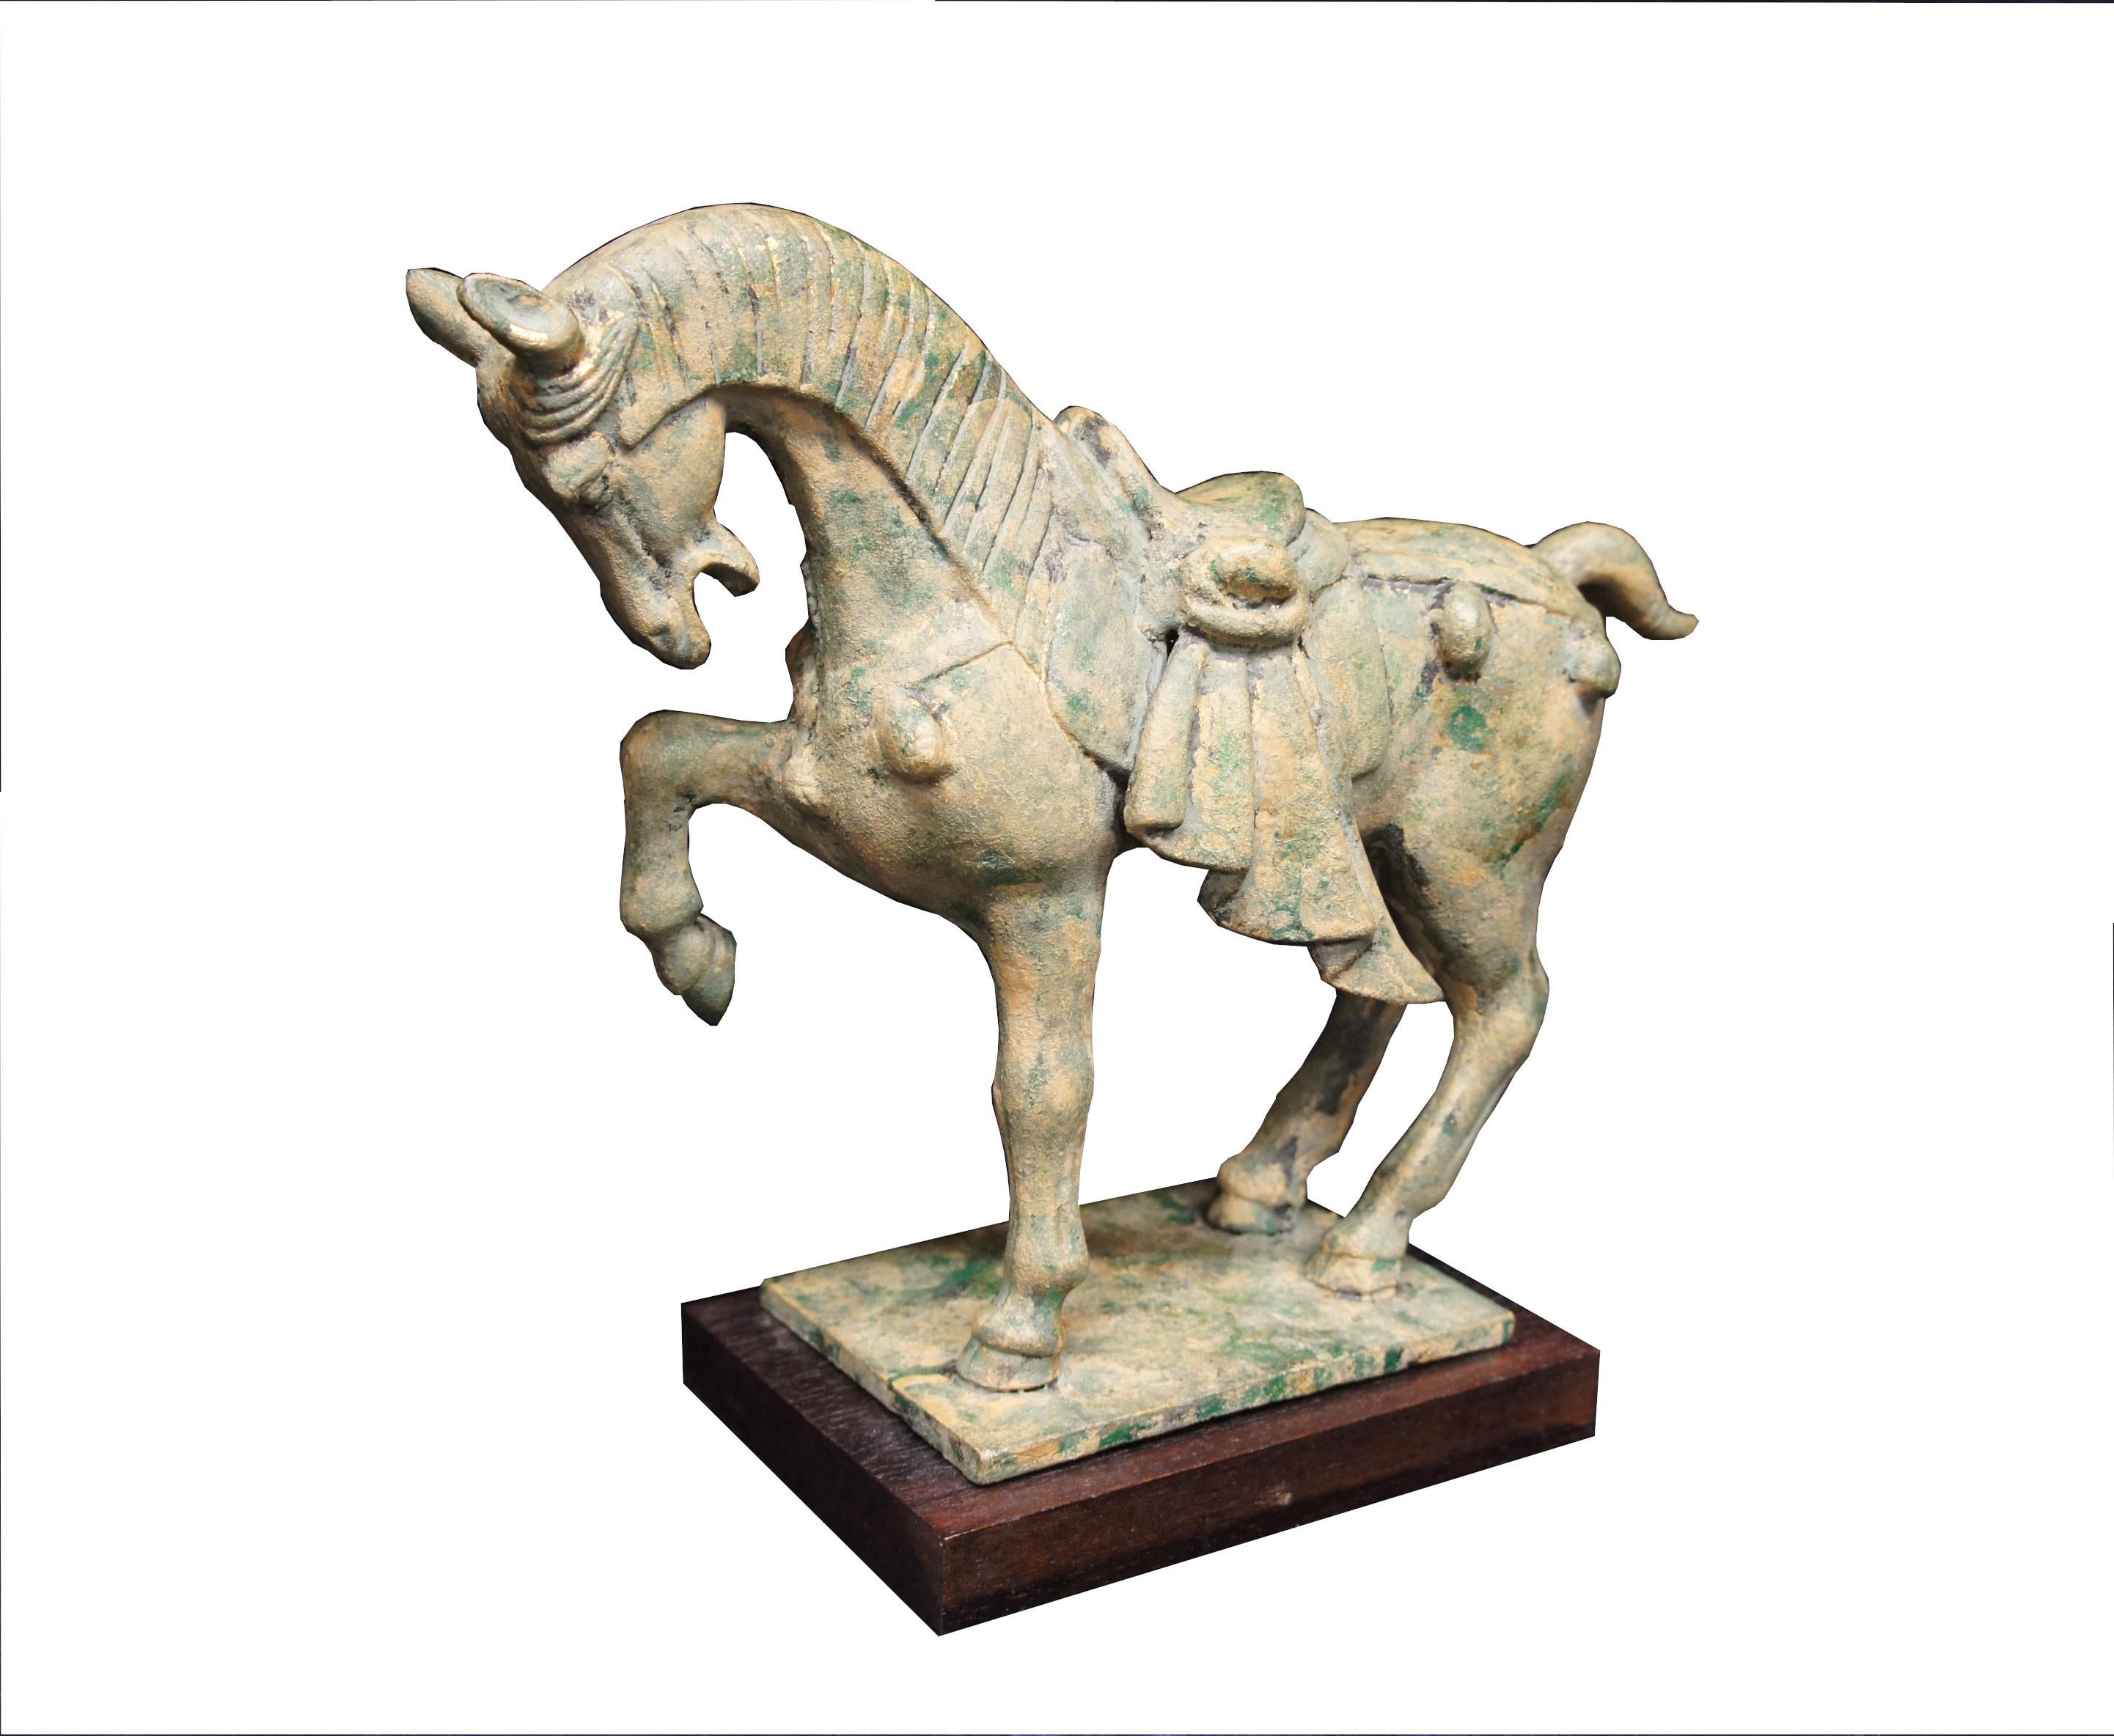 Mid 20th Century Tang Dynasty style Horse Figure. Made from Cast bronze with lovely patina.  Comes with wooden stand. Marked Japan along the base.

Dimensions:
12